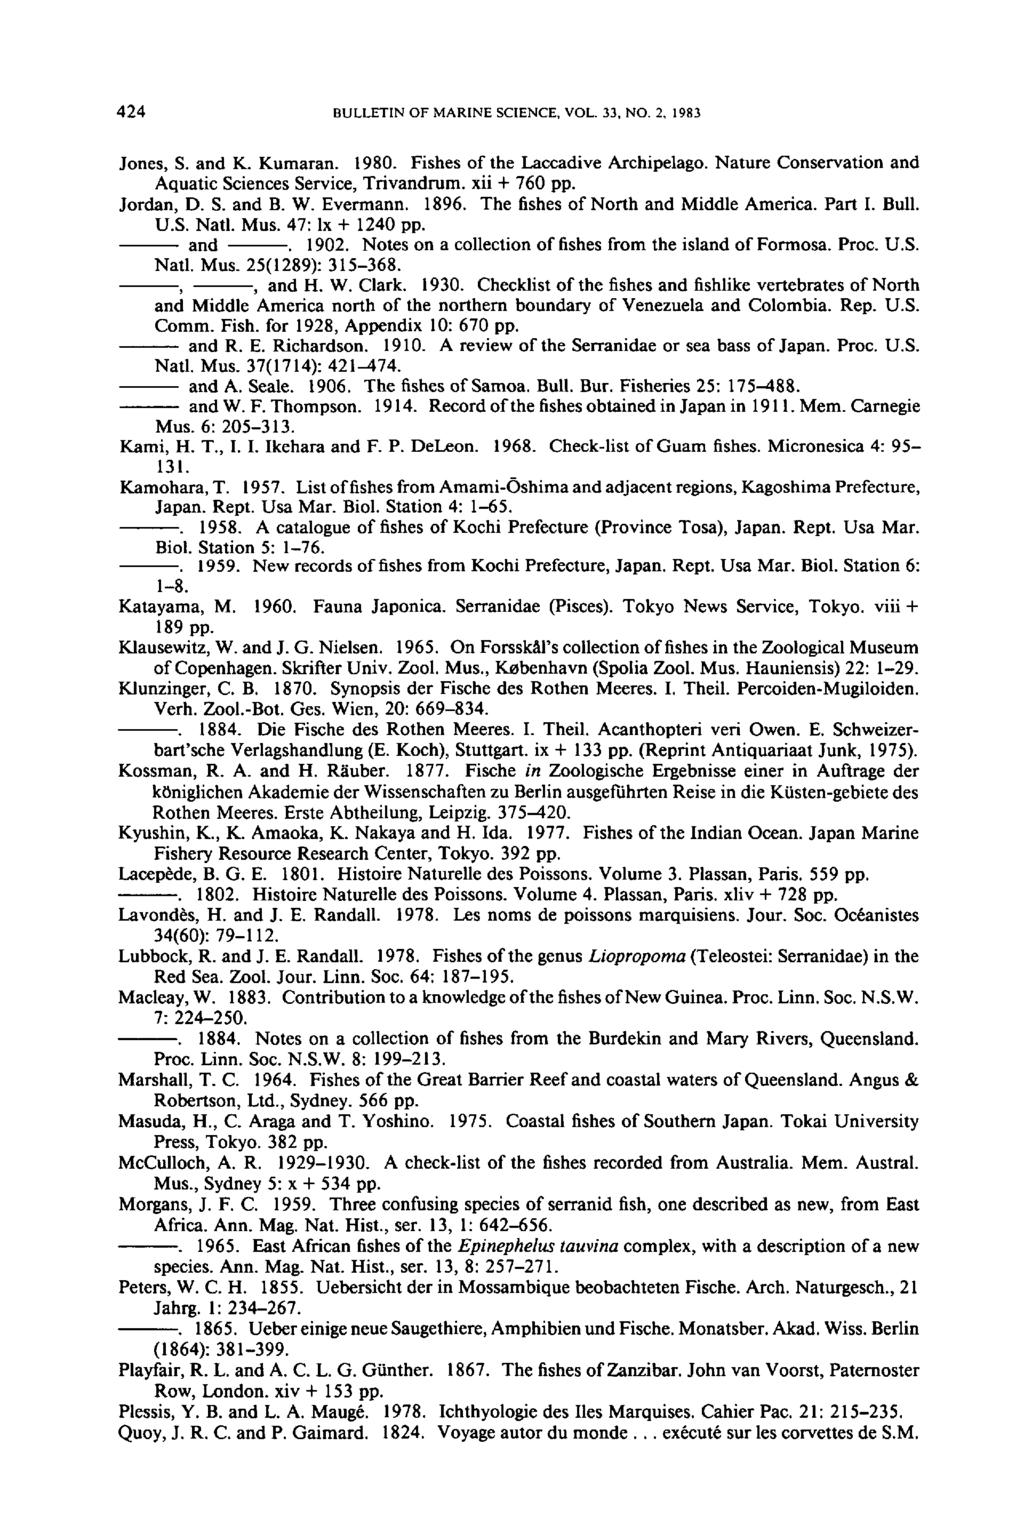 424 BULLETIN OF MARINE SCIENCE, VOL. 33, NO.2, 1983 Jones, S. and K. Kumaran. 1980. Fishes of the Laccadive Archipelago. Nature Conservation and Aquatic Sciences Service, Trivandrum. xii + 760 pp.